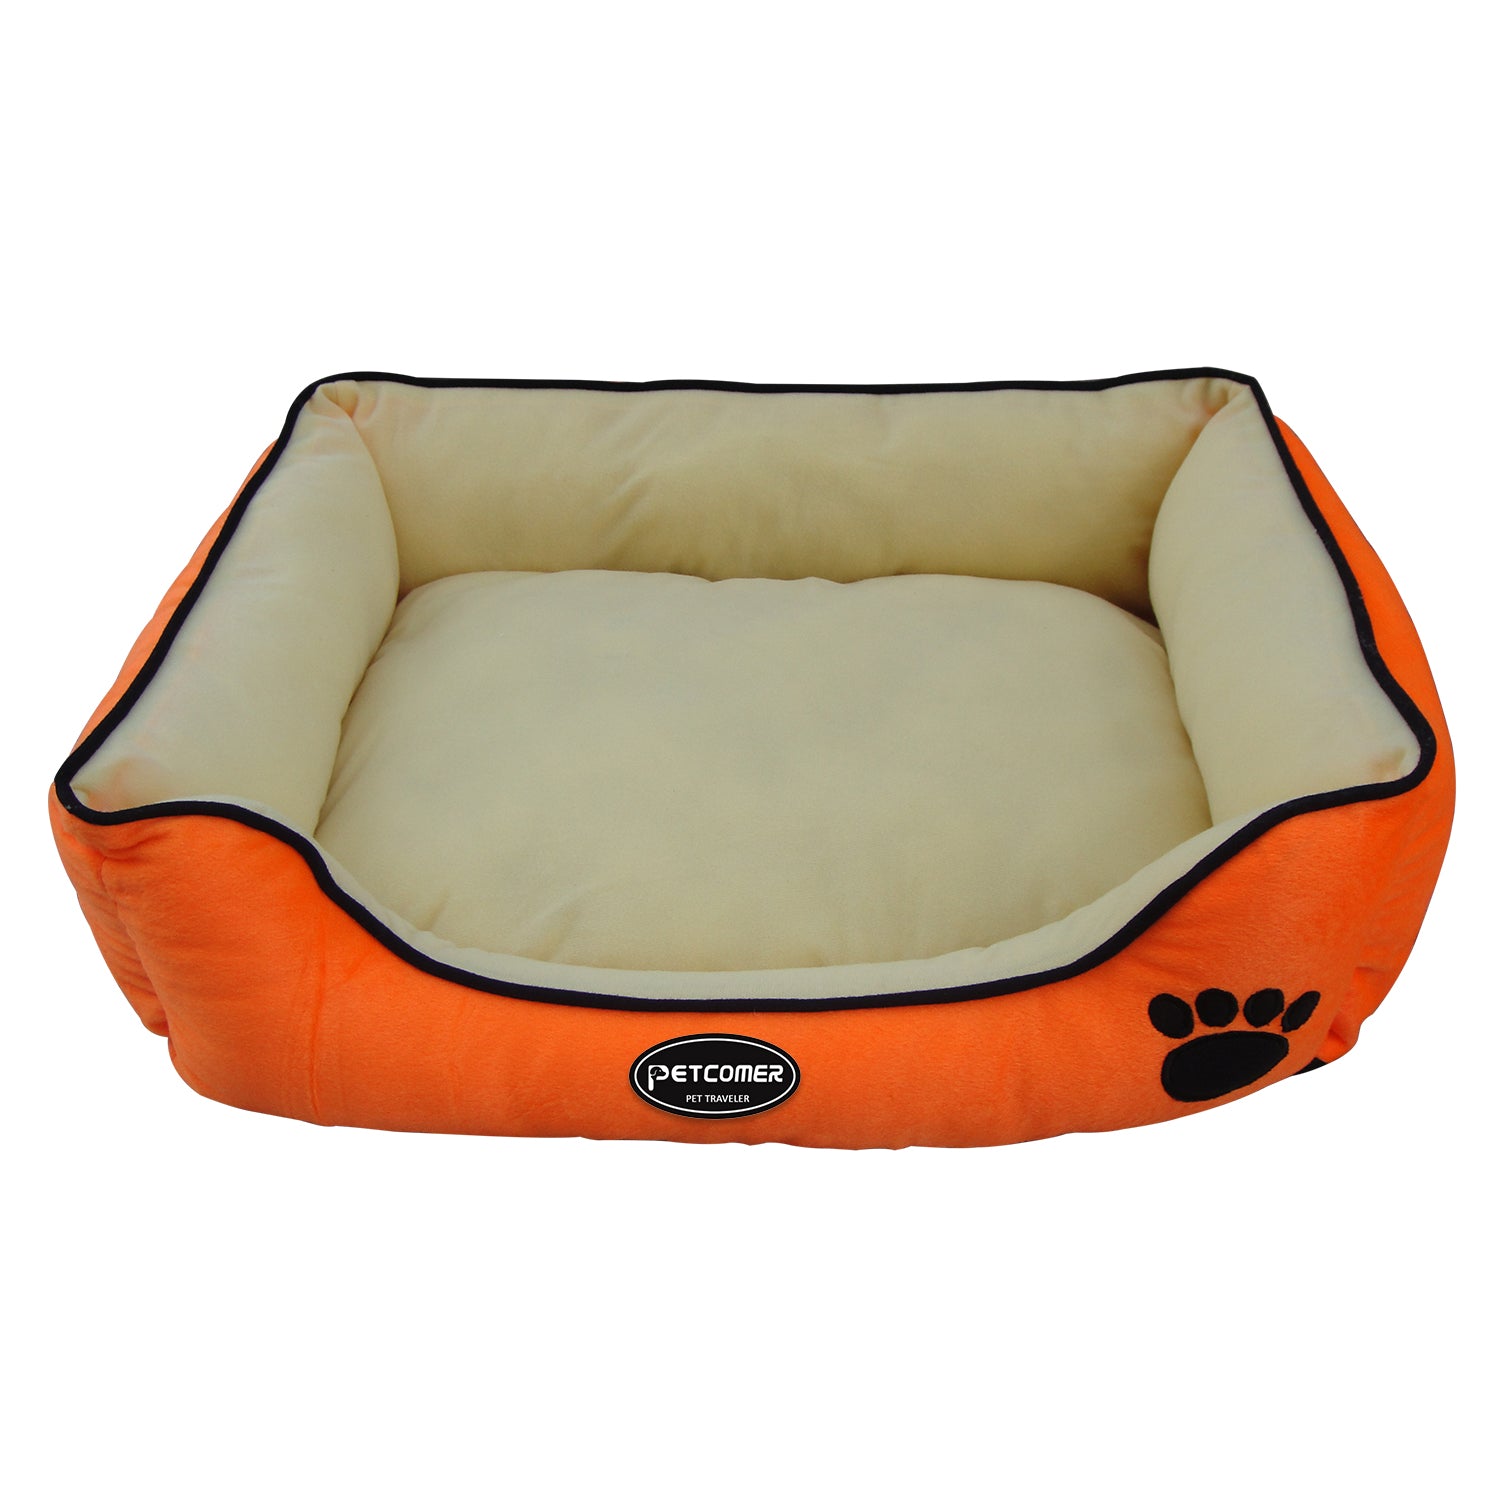 PETCOMER PET TRAVELER Pet Beds for Household, Rectangle Dog Bed for Medium Small Dogs, 20"L x 19"W x 6"Th